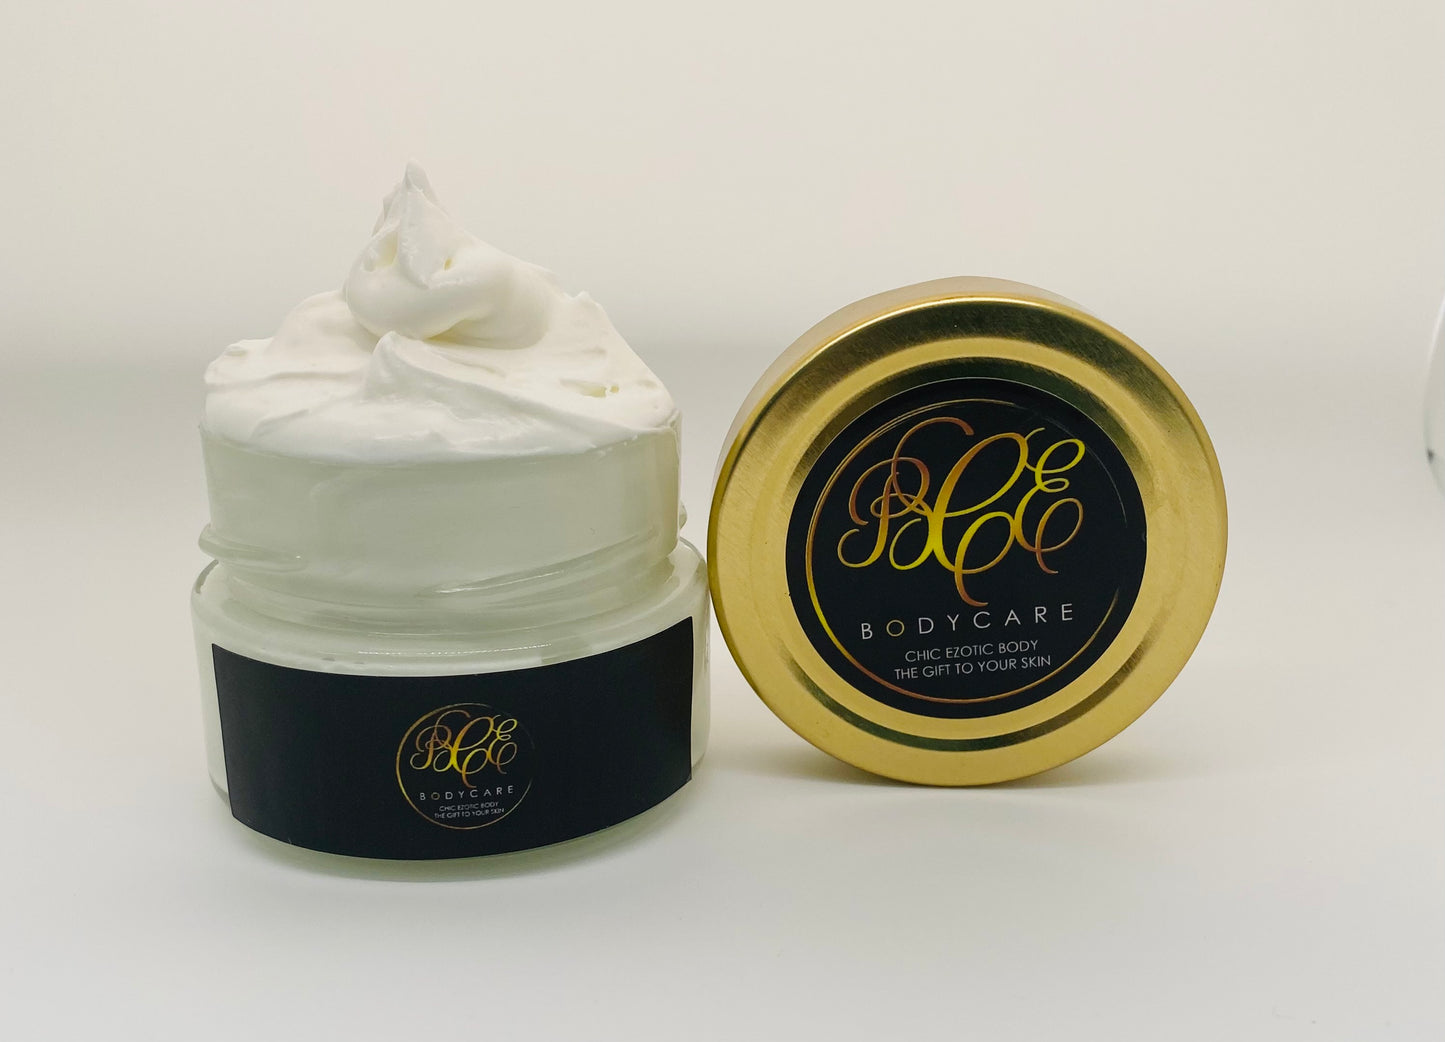 Chic Ezotic Body In the nude soft handmade whipped Gourmet Shea Butter  (Women)